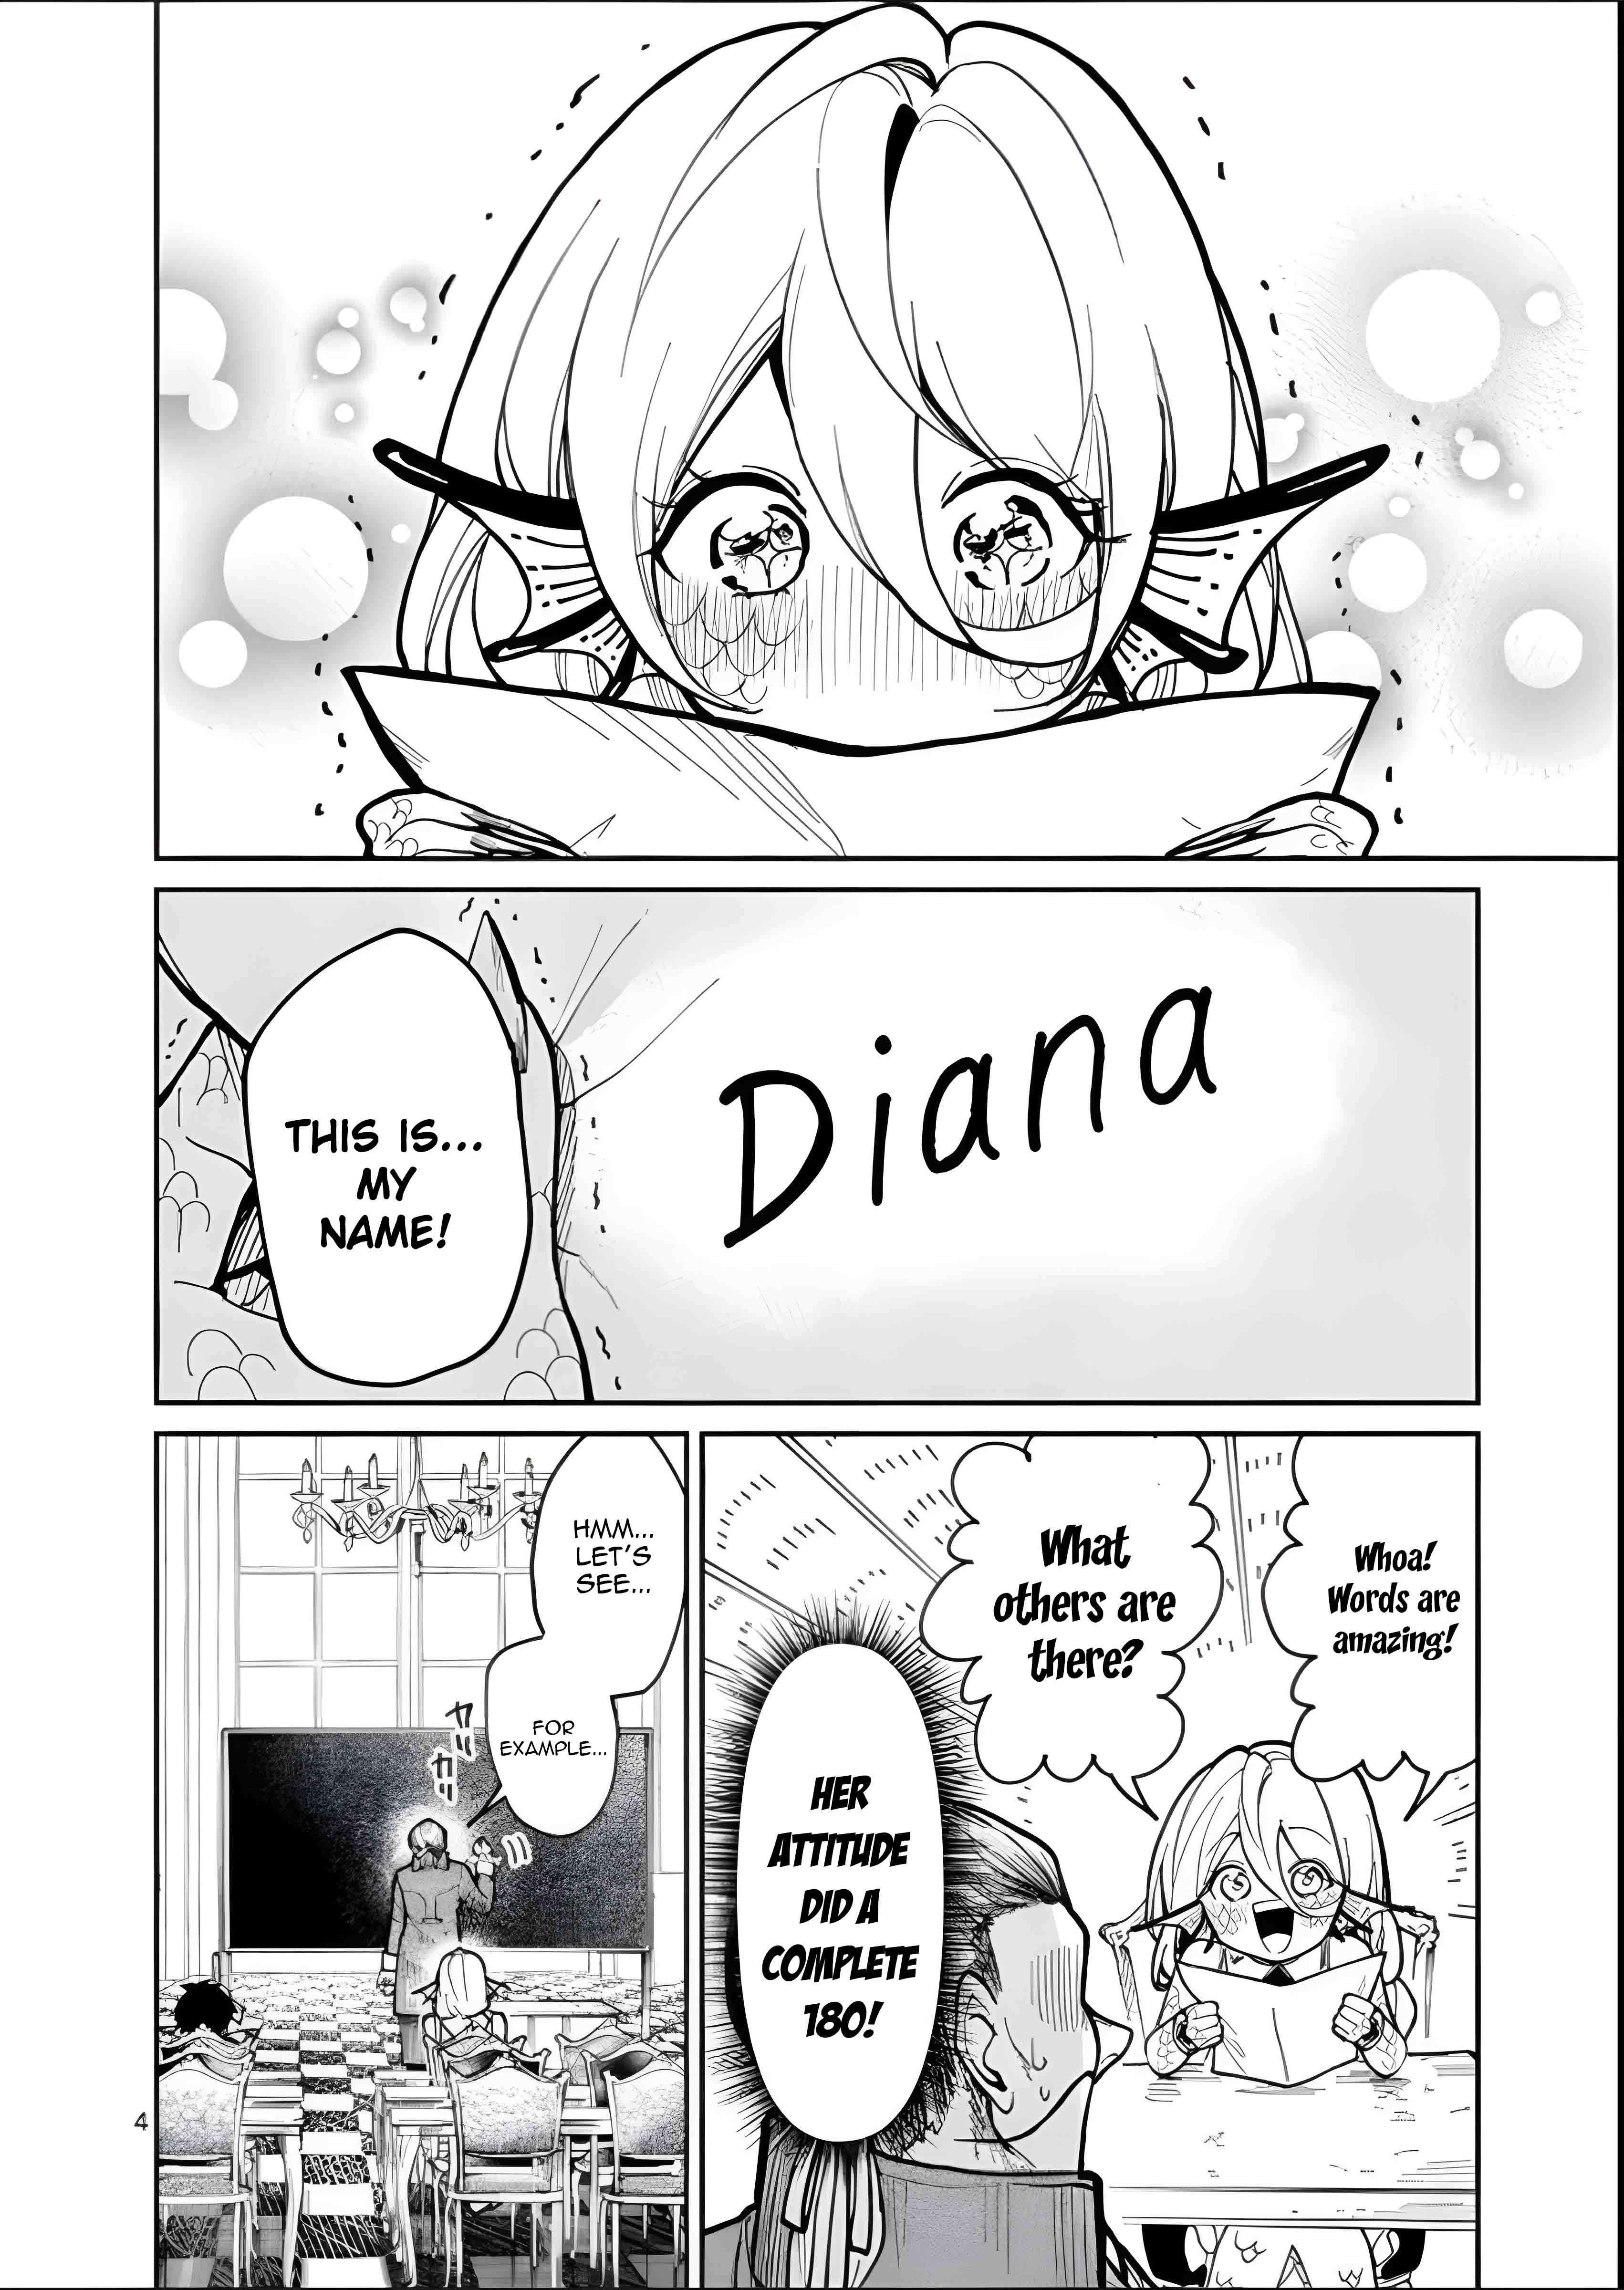 Diana Is a Strange Mermaid - chapter 10 - #5